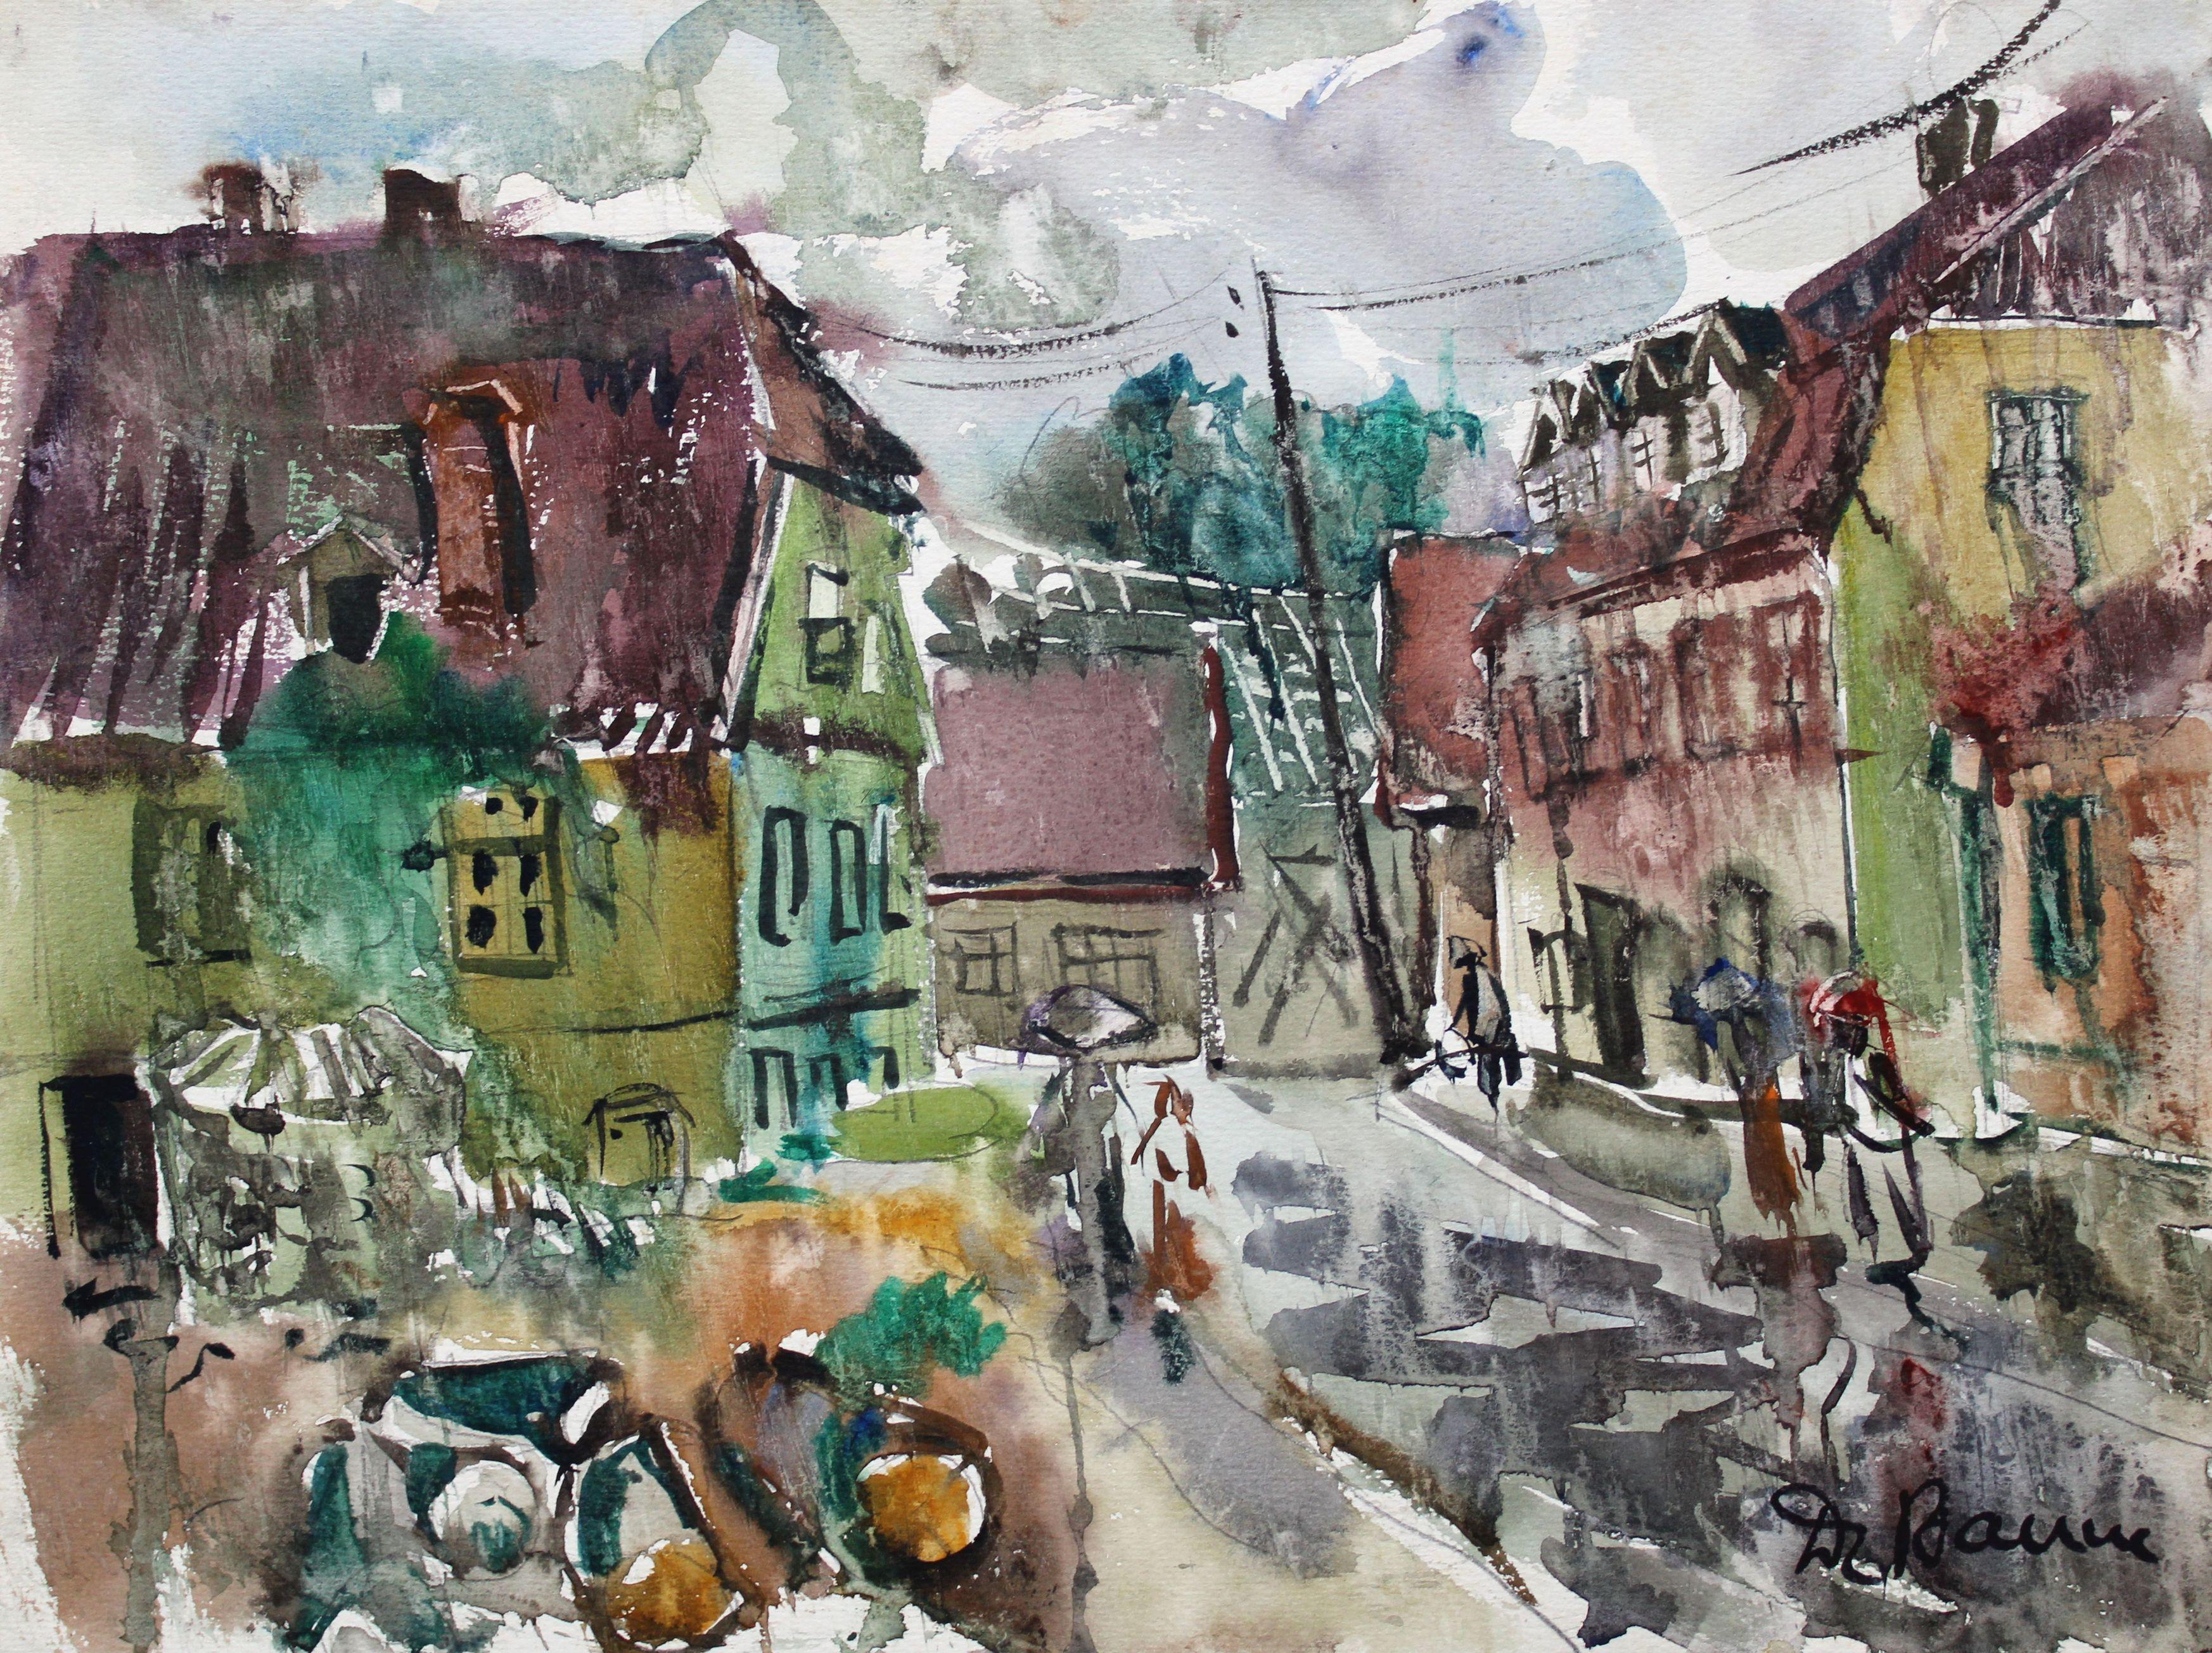 In a small town. 1969, paper, watercolor, 36x48 cm